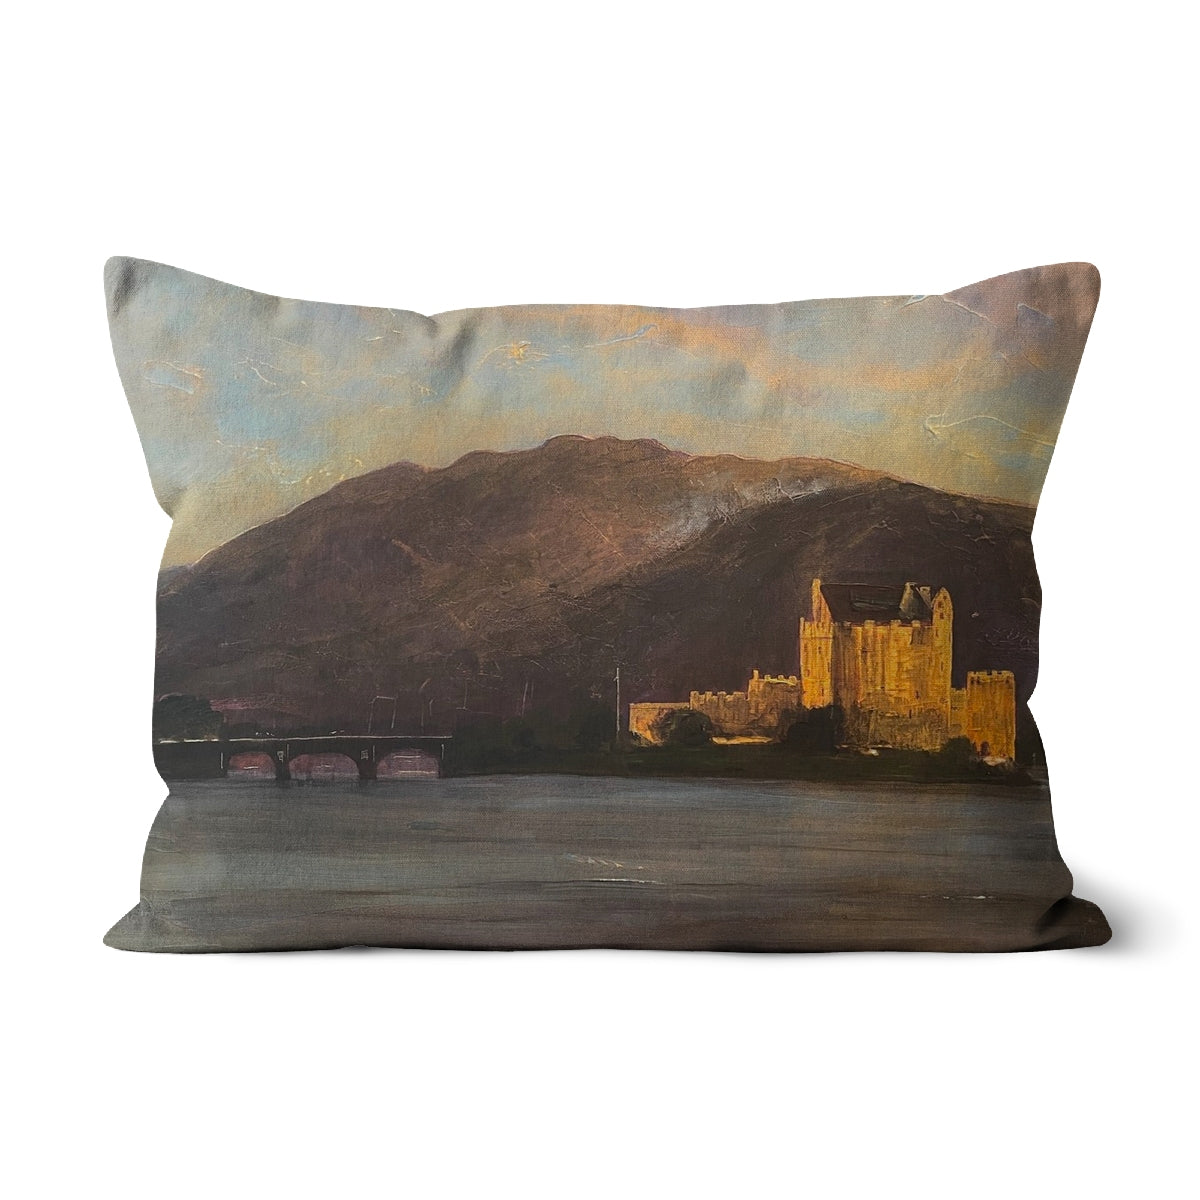 Eilean Donan Castle Art Gifts Cushion-Cushions-Historic & Iconic Scotland Art Gallery-Linen-19"x13"-Paintings, Prints, Homeware, Art Gifts From Scotland By Scottish Artist Kevin Hunter